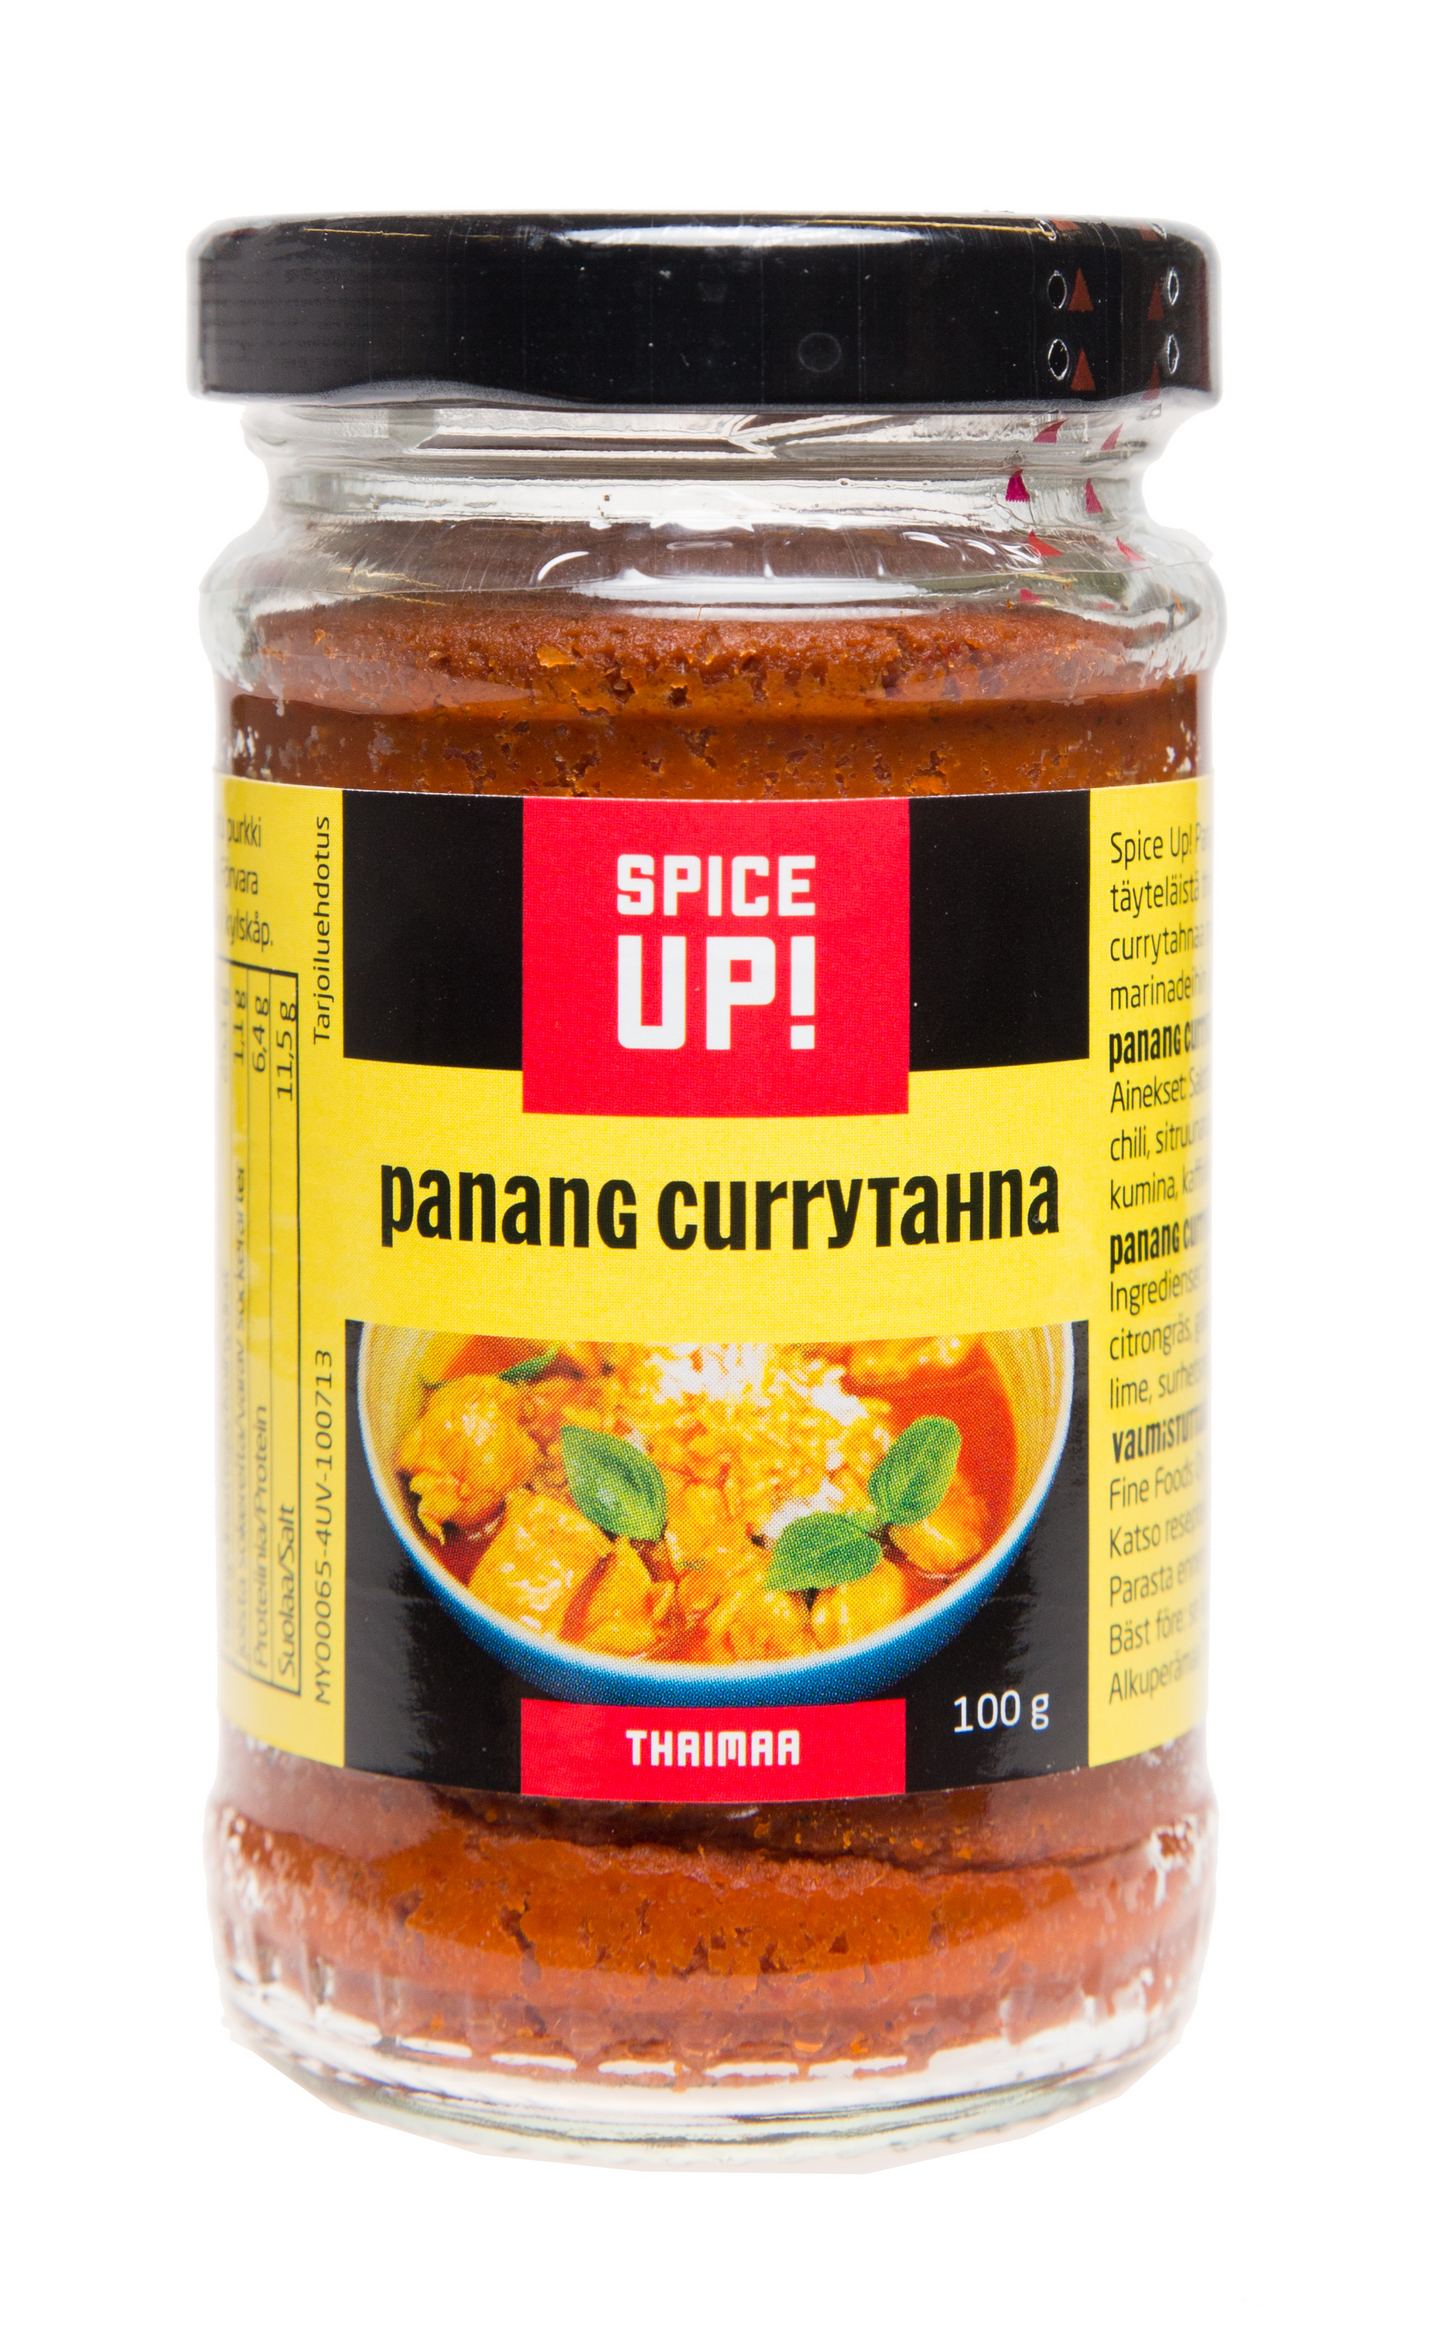 Spice Up Panang currytahna 100g